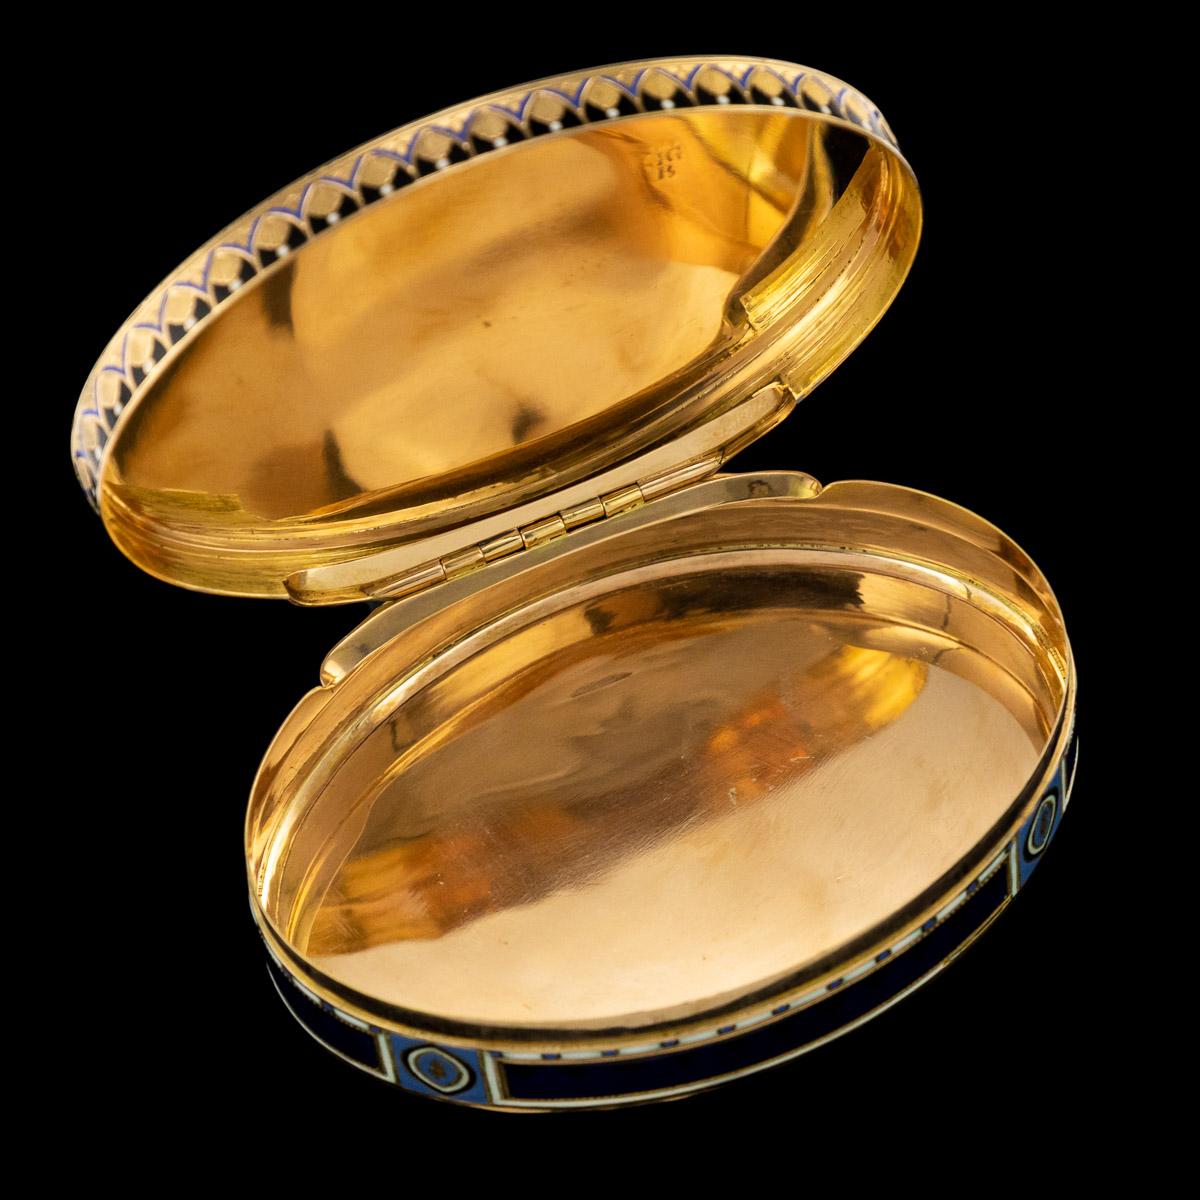 Early 19th Century 19th Century Swiss 18-Karat Gold and Enamel Snuff Box, Guidon, Gide and Blondet